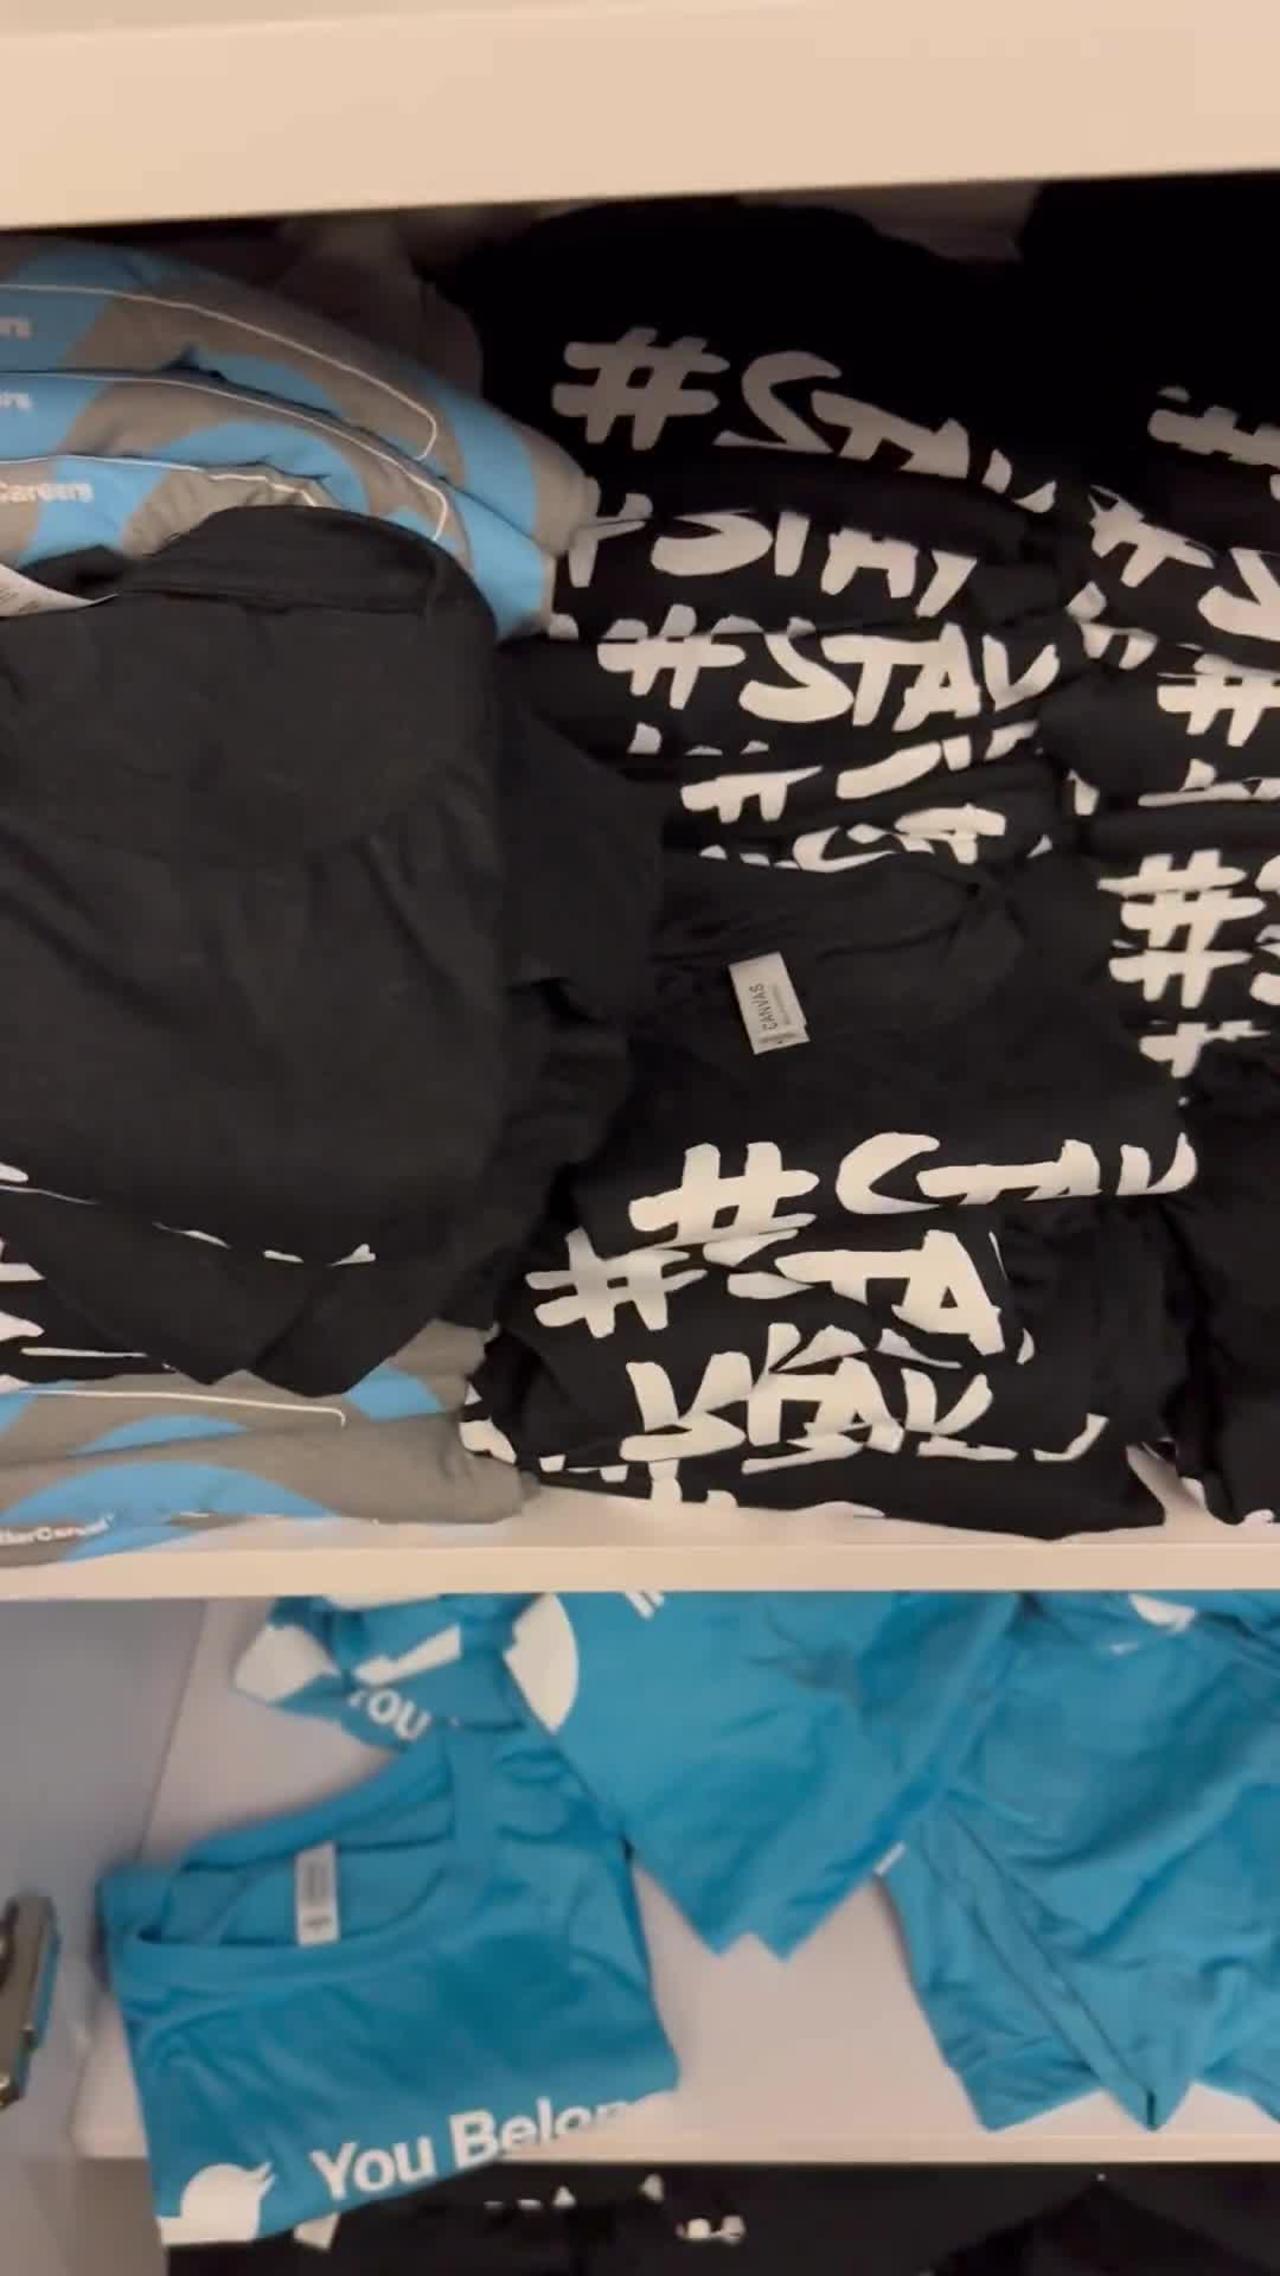 TWEET SHIRTS: Watch Musk Uncover Closet Filled With '#StayWoke' T-Shirts at Twitter HQ